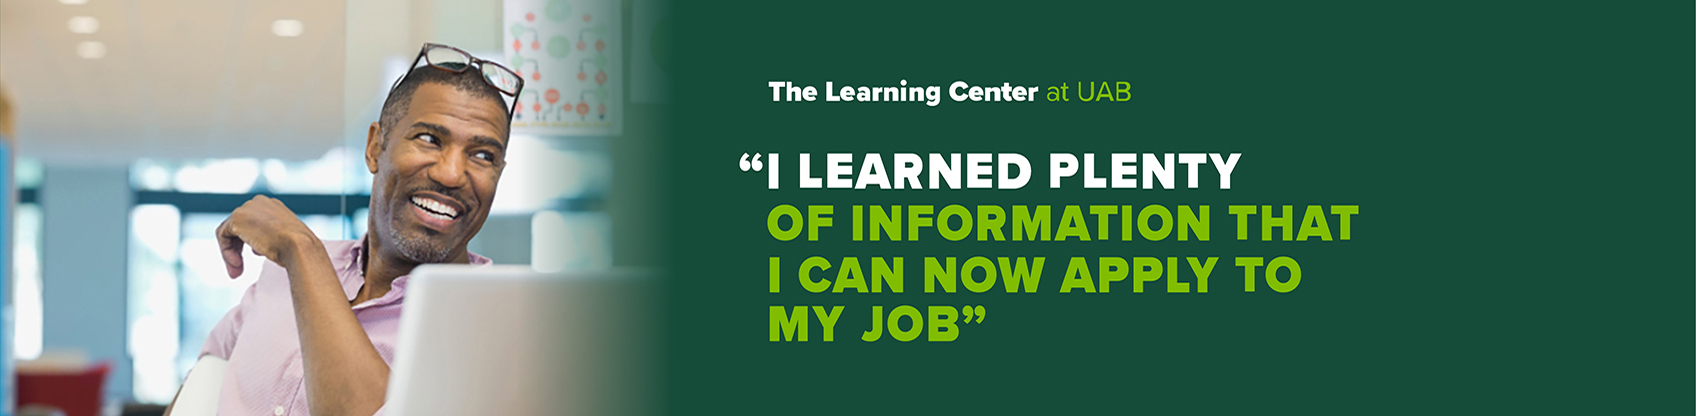 The Learning Center at UAB - LinkedIn Learning